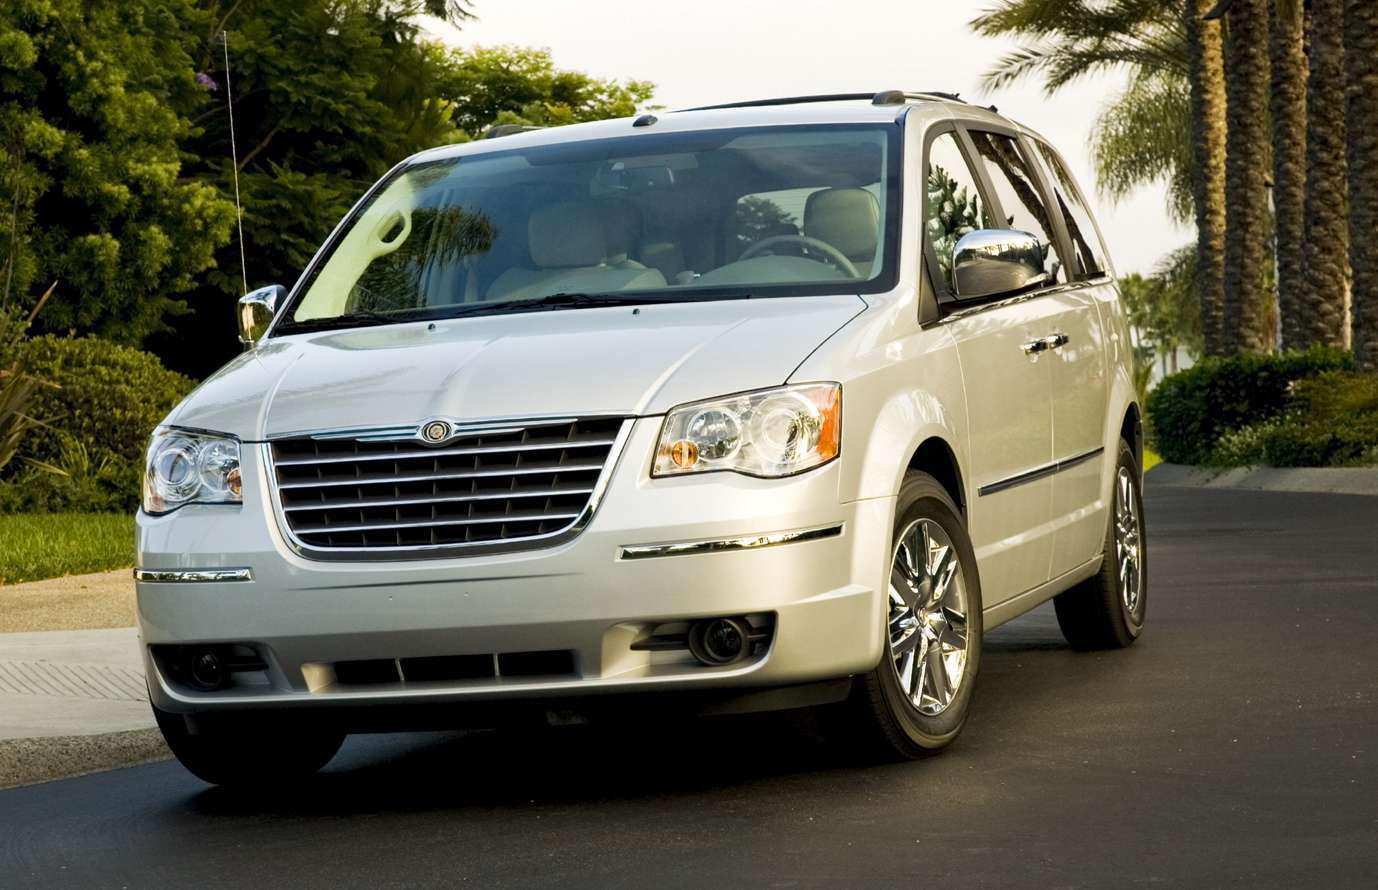 2010 Chrysler town country recall #2